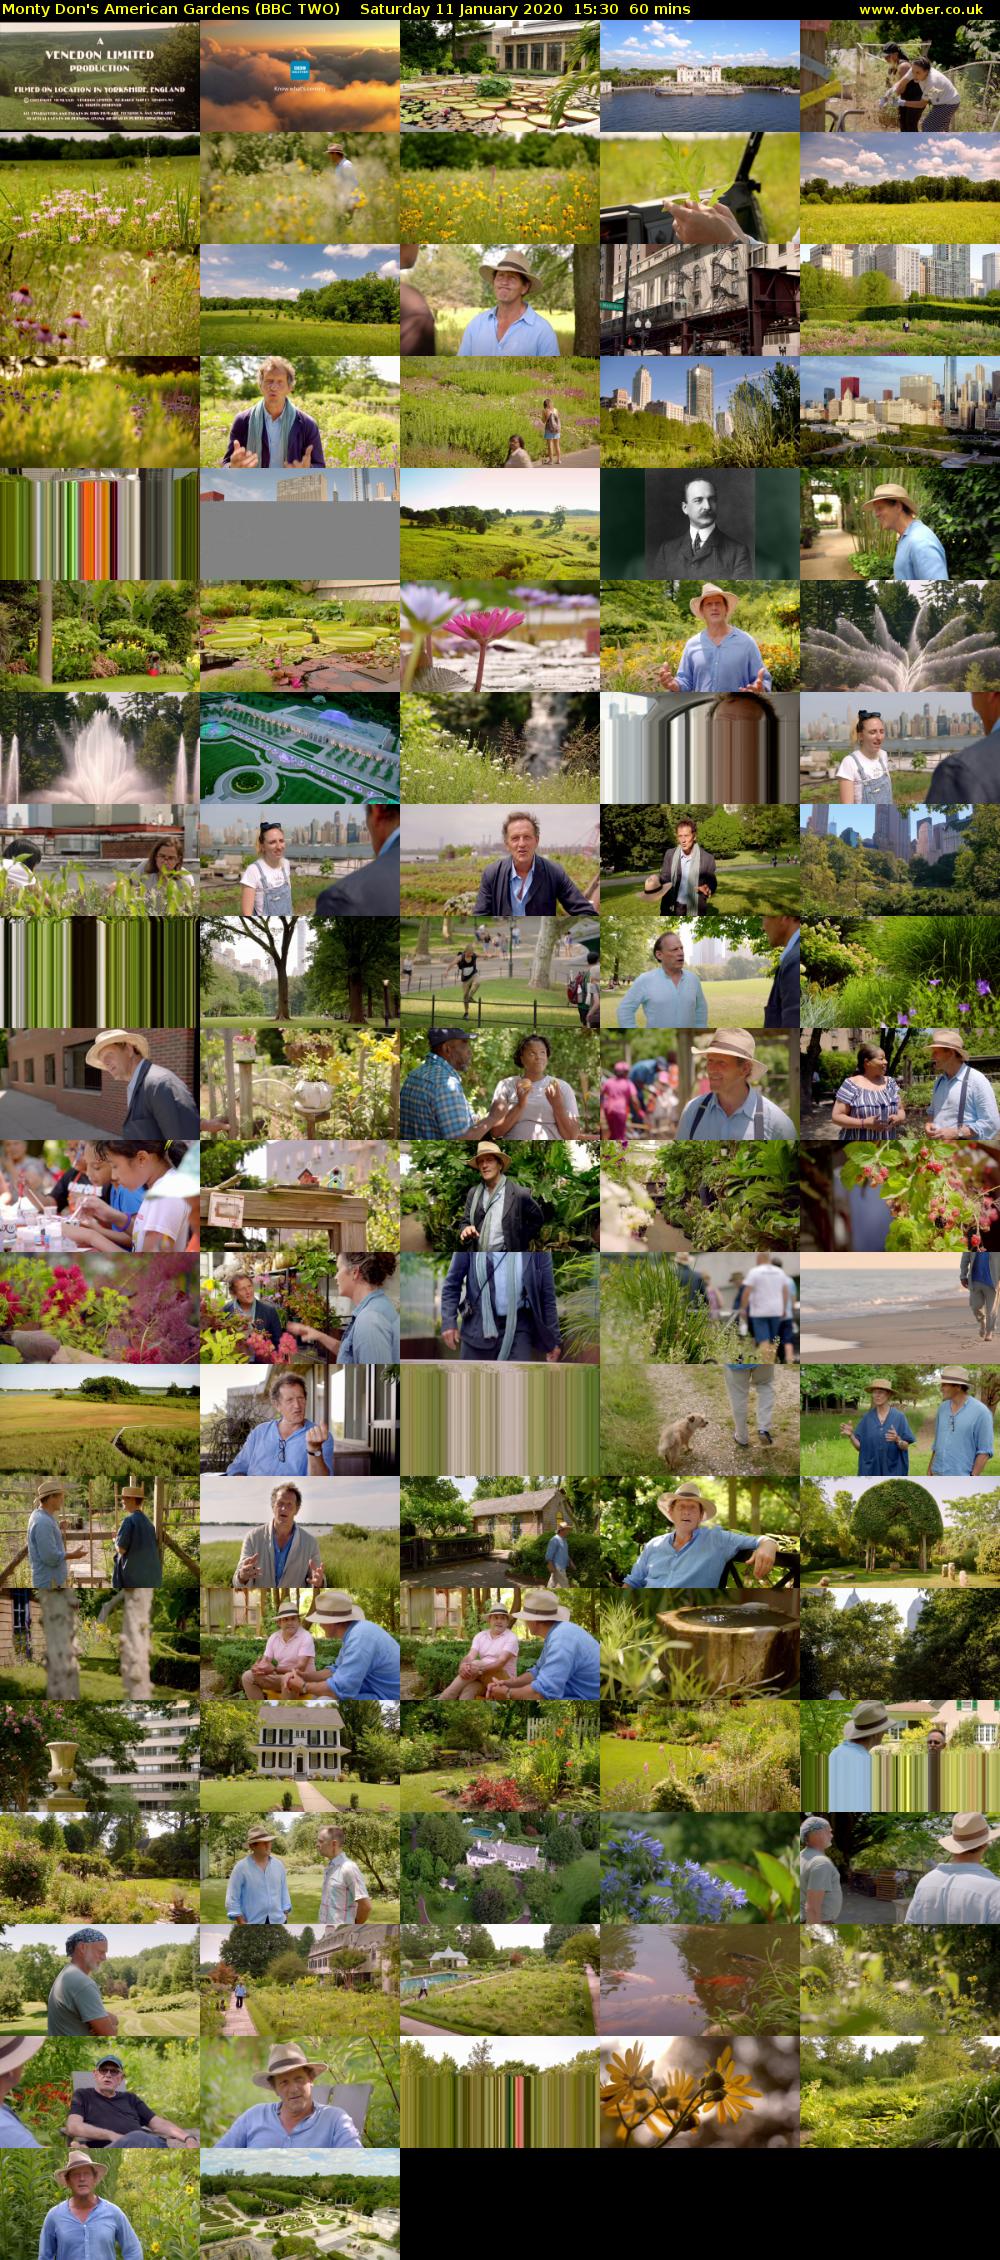 Monty Don's American Gardens (BBC TWO) Saturday 11 January 2020 15:30 - 16:30